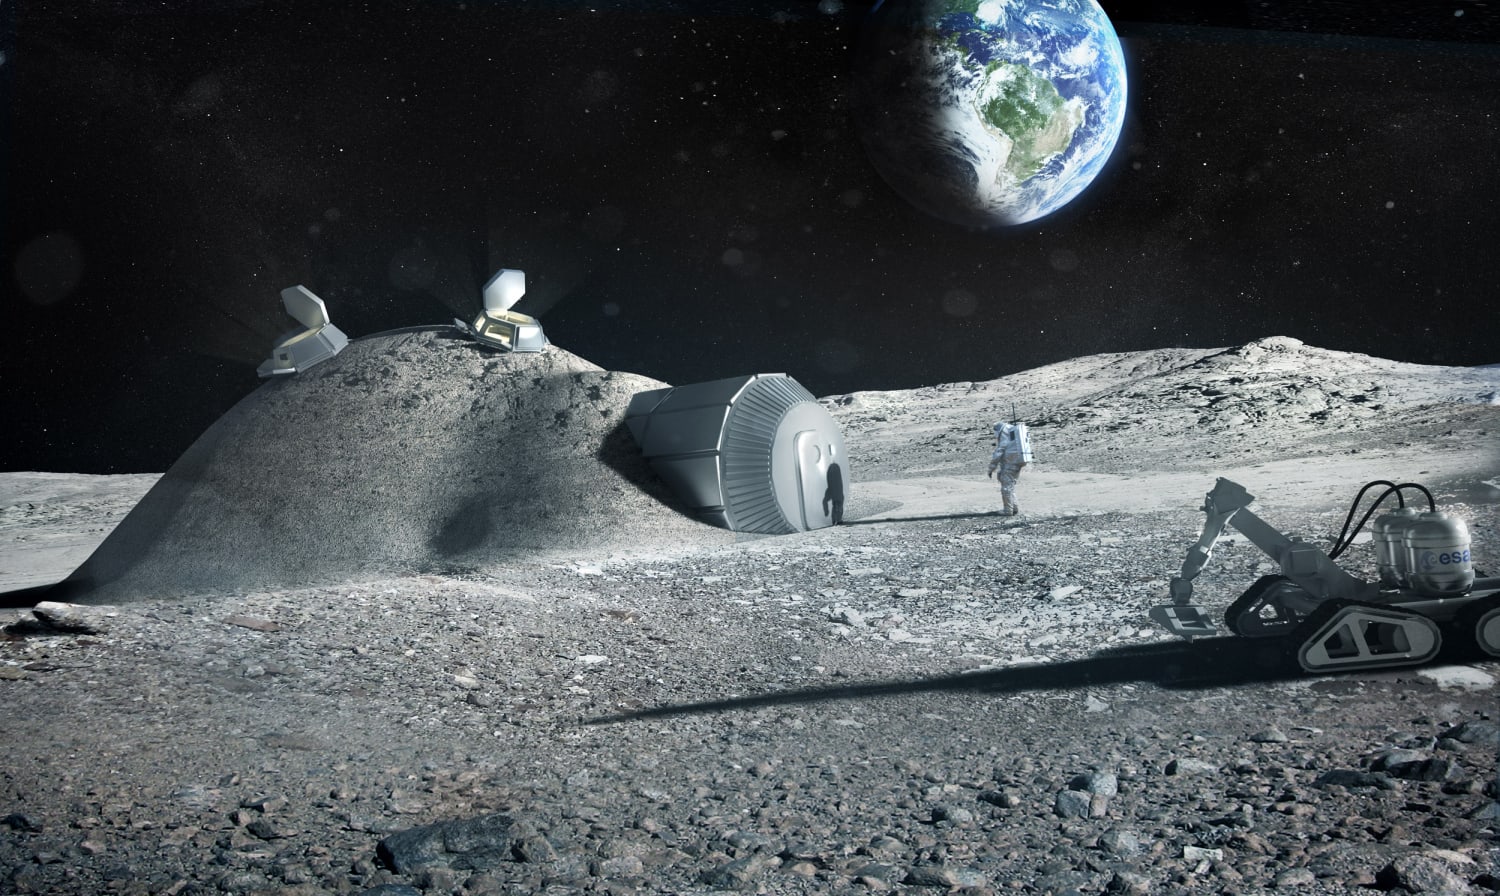 Moon bases being planned now may show us how to live off-planet